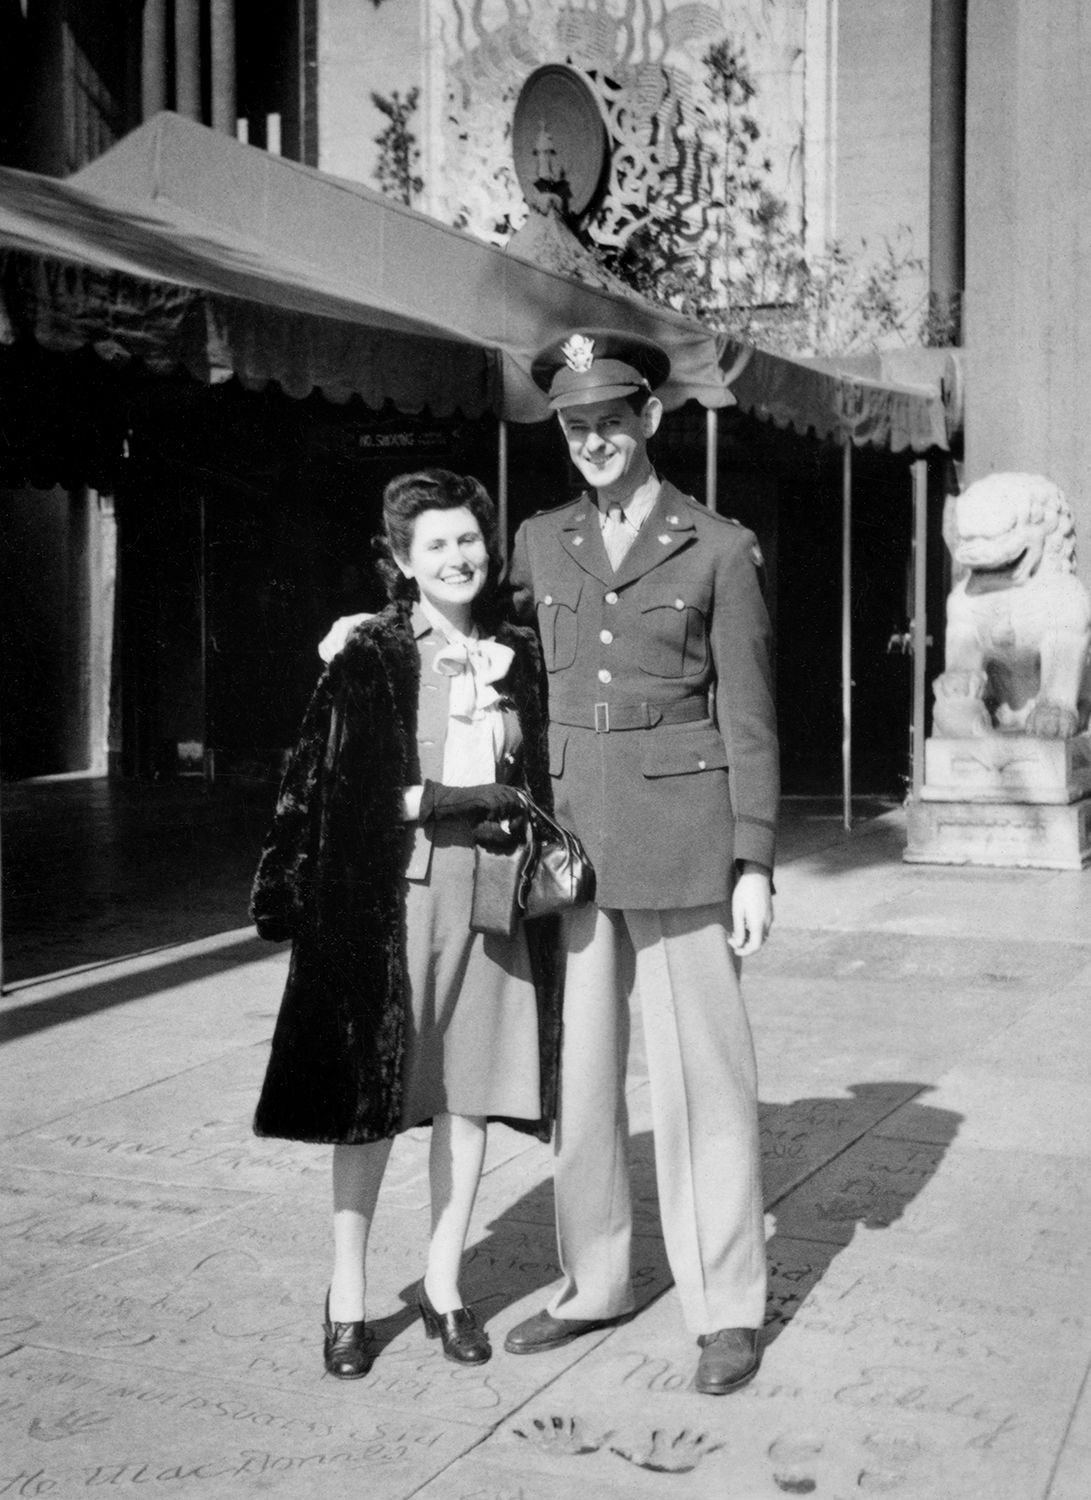 Jean and Fred Outside of Grauman's Chinese Theater in LA